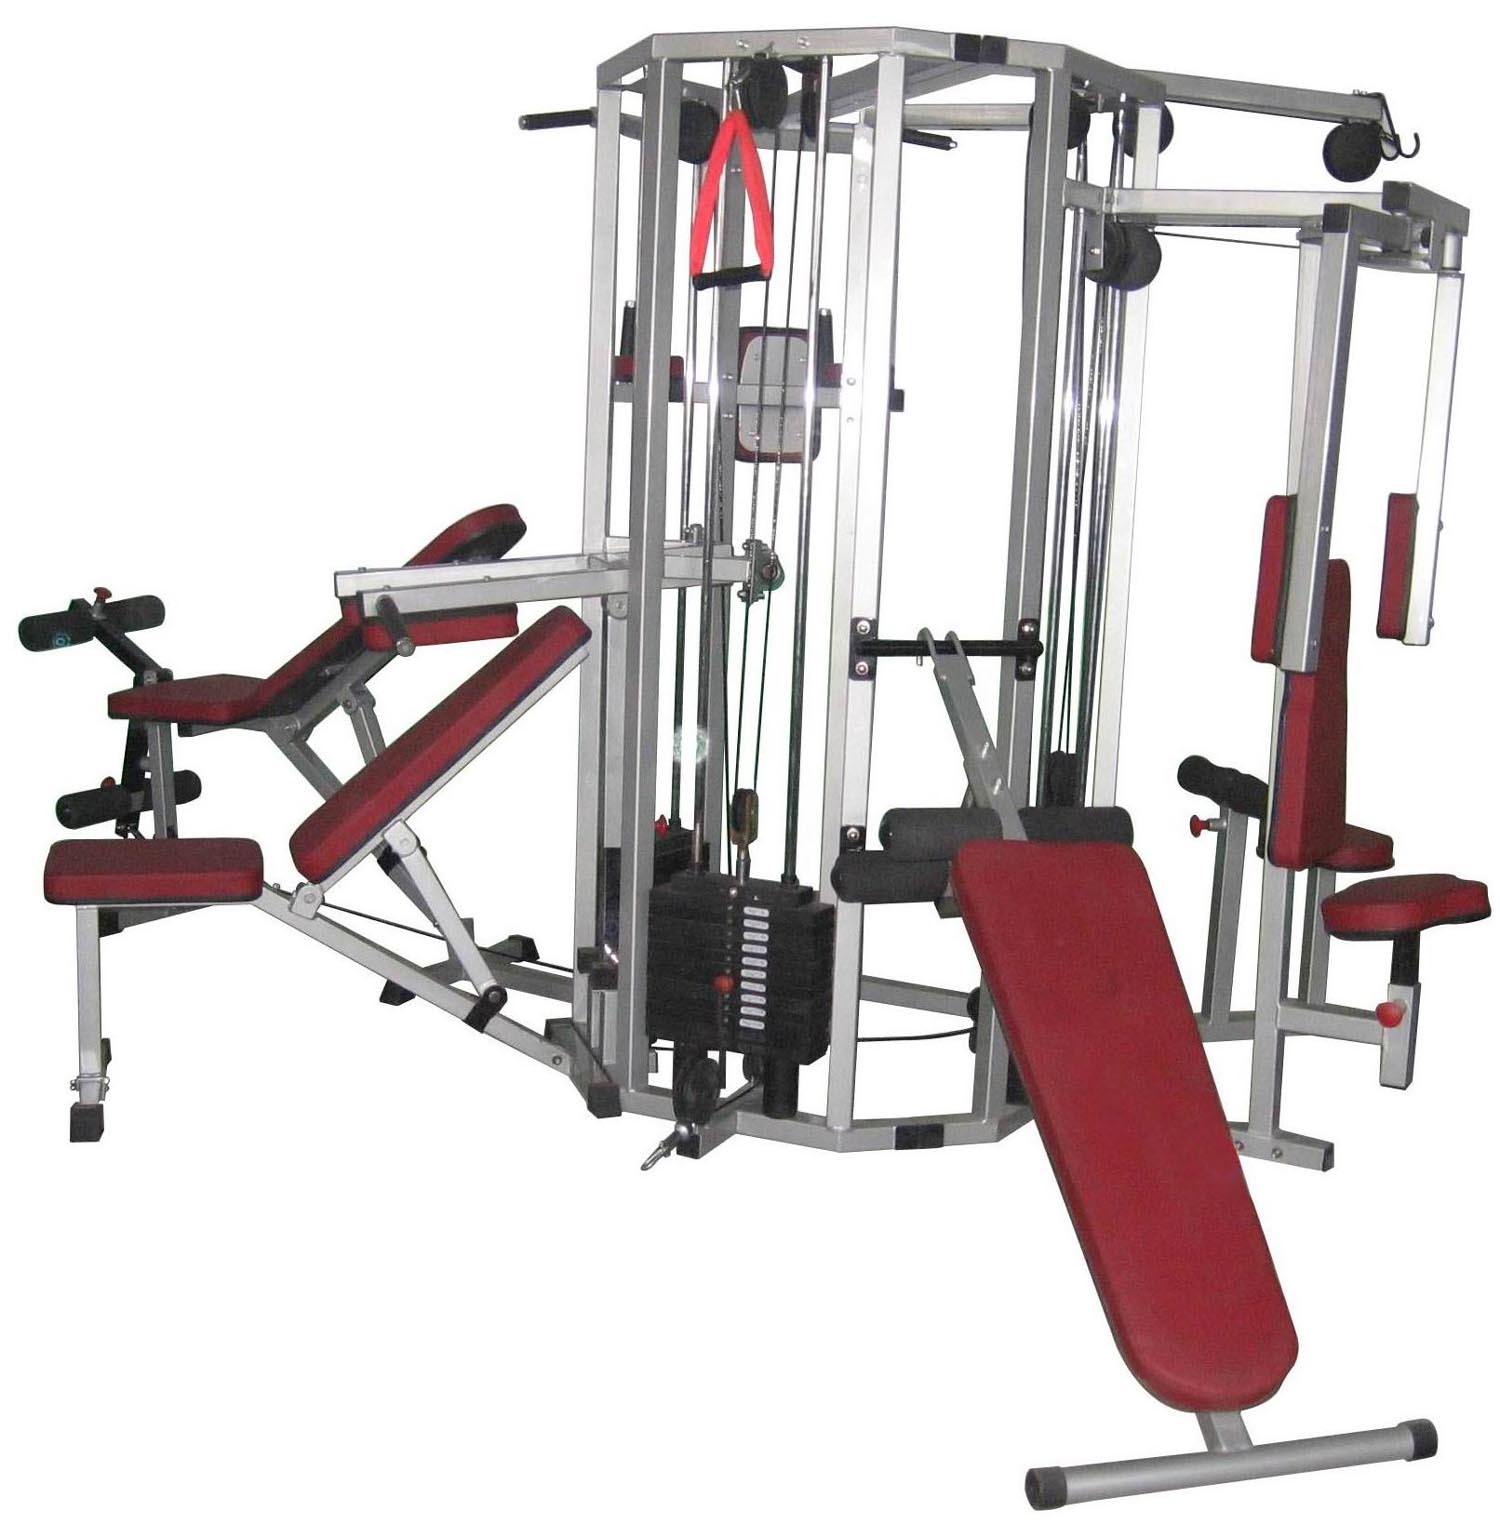 Fitness Items: Exercise with Gym Equipments Vs. Aerobic Exercise